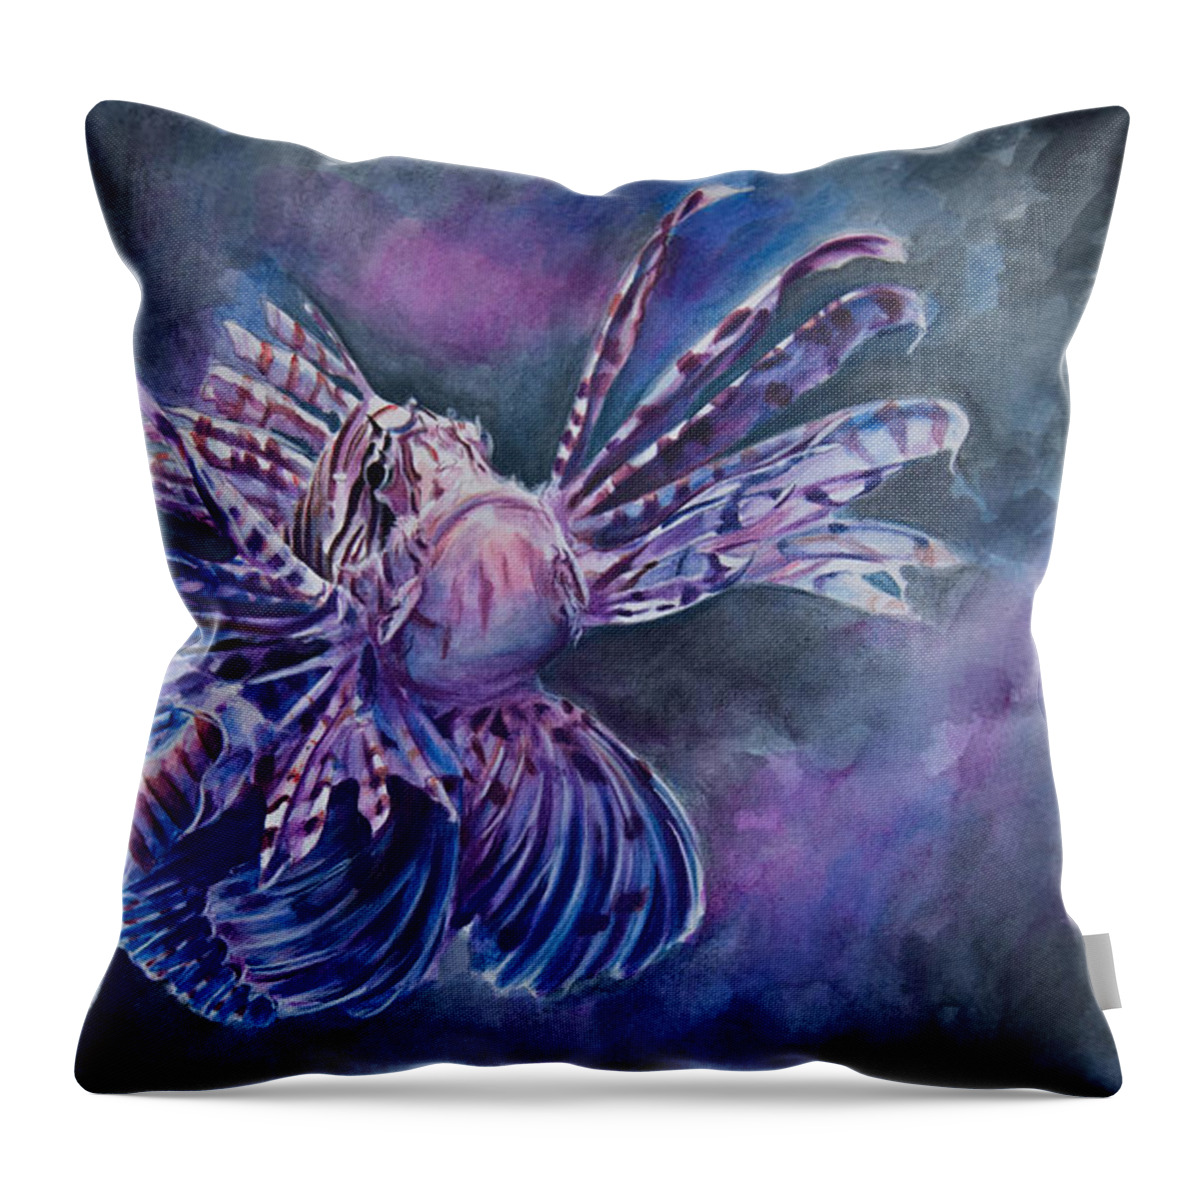 Lionfish Throw Pillow featuring the painting Lionfish by Lachri